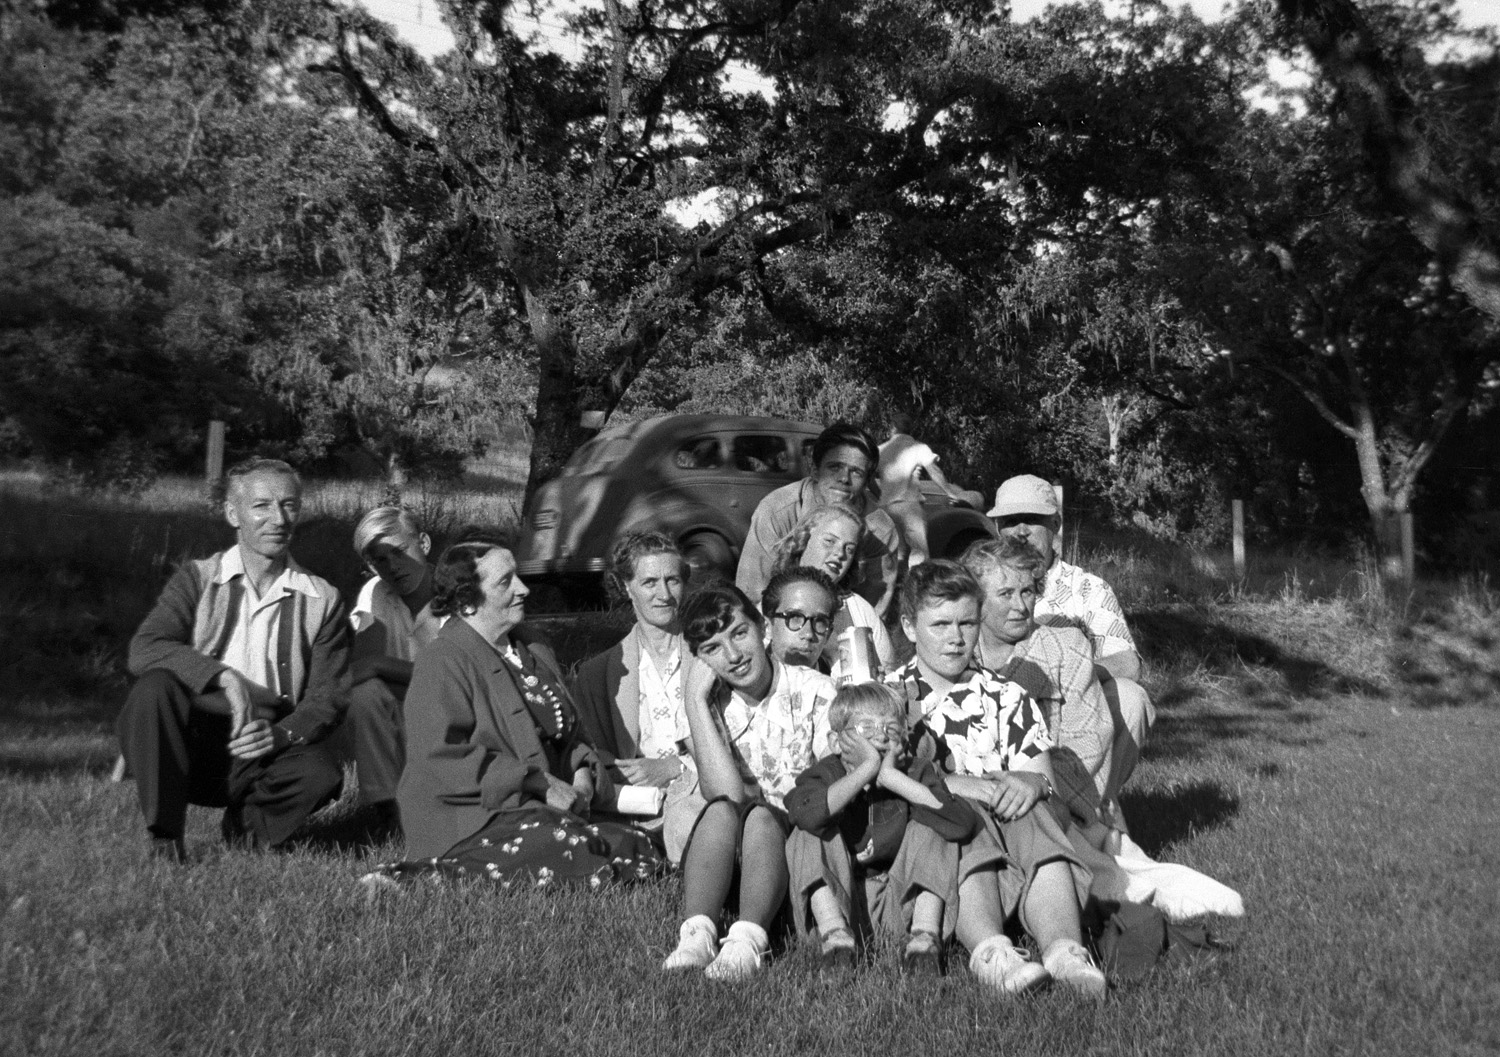 Interpreting facial expressions is a favorite Shorpy pastime, so herewith I present those of my family and friends for your speculations. Granted, some are influenced by the angle of incoming solar radiation. To the best of our recollections, this was a church picnic at Boyes Hot Springs, California. My father is at the left, my mother in the center looking at the camera, my sister propping her head on her hand, my brother over her shoulder. I'll let you guess which one is me, but as a hint he just might be the one who seems to be thinking: "I'm bored. Why can't I be home reading my comic books?" This snapshot, clicked off by a friend with my sister's Duaflex, benefited from one of those happy combinations of circumstances: nice sunlight angle and an exposure perfectly suited to the camera's fixed f-stop for Verichrome film (cropped down from a 2-1/4 square negative). Still, I rather think the shot is made by the lady who apparently didn't hear "Watch the birdie."  View full size.